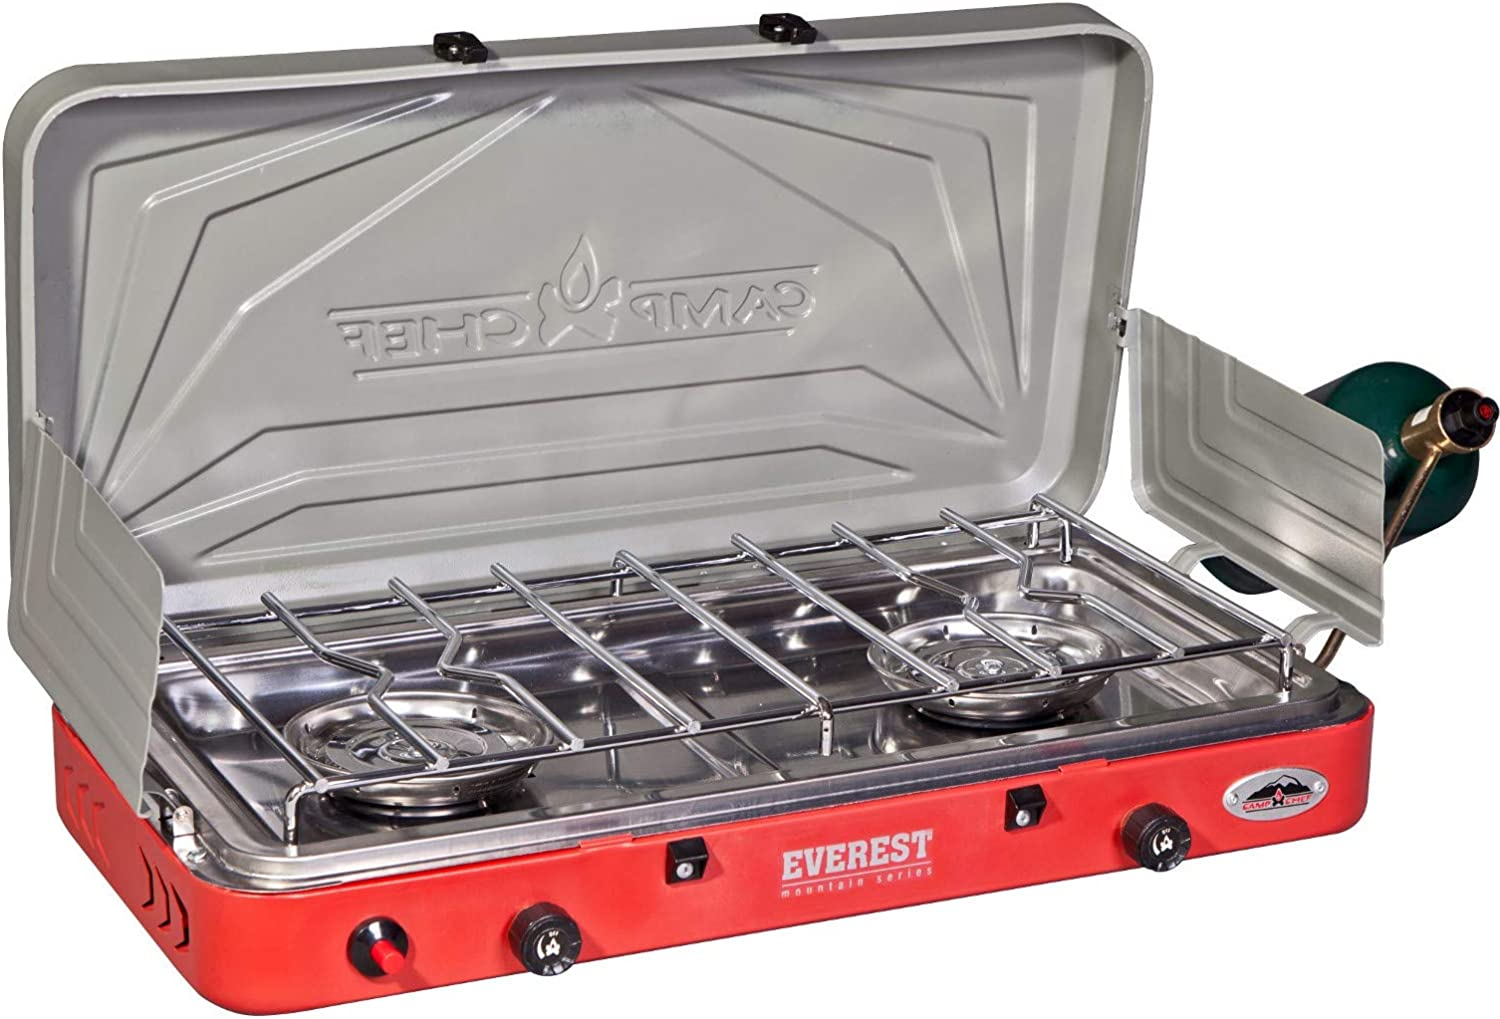 Camp Chef Everest 2-Burner Propane Camping Stove $84.60 + Free Shipping